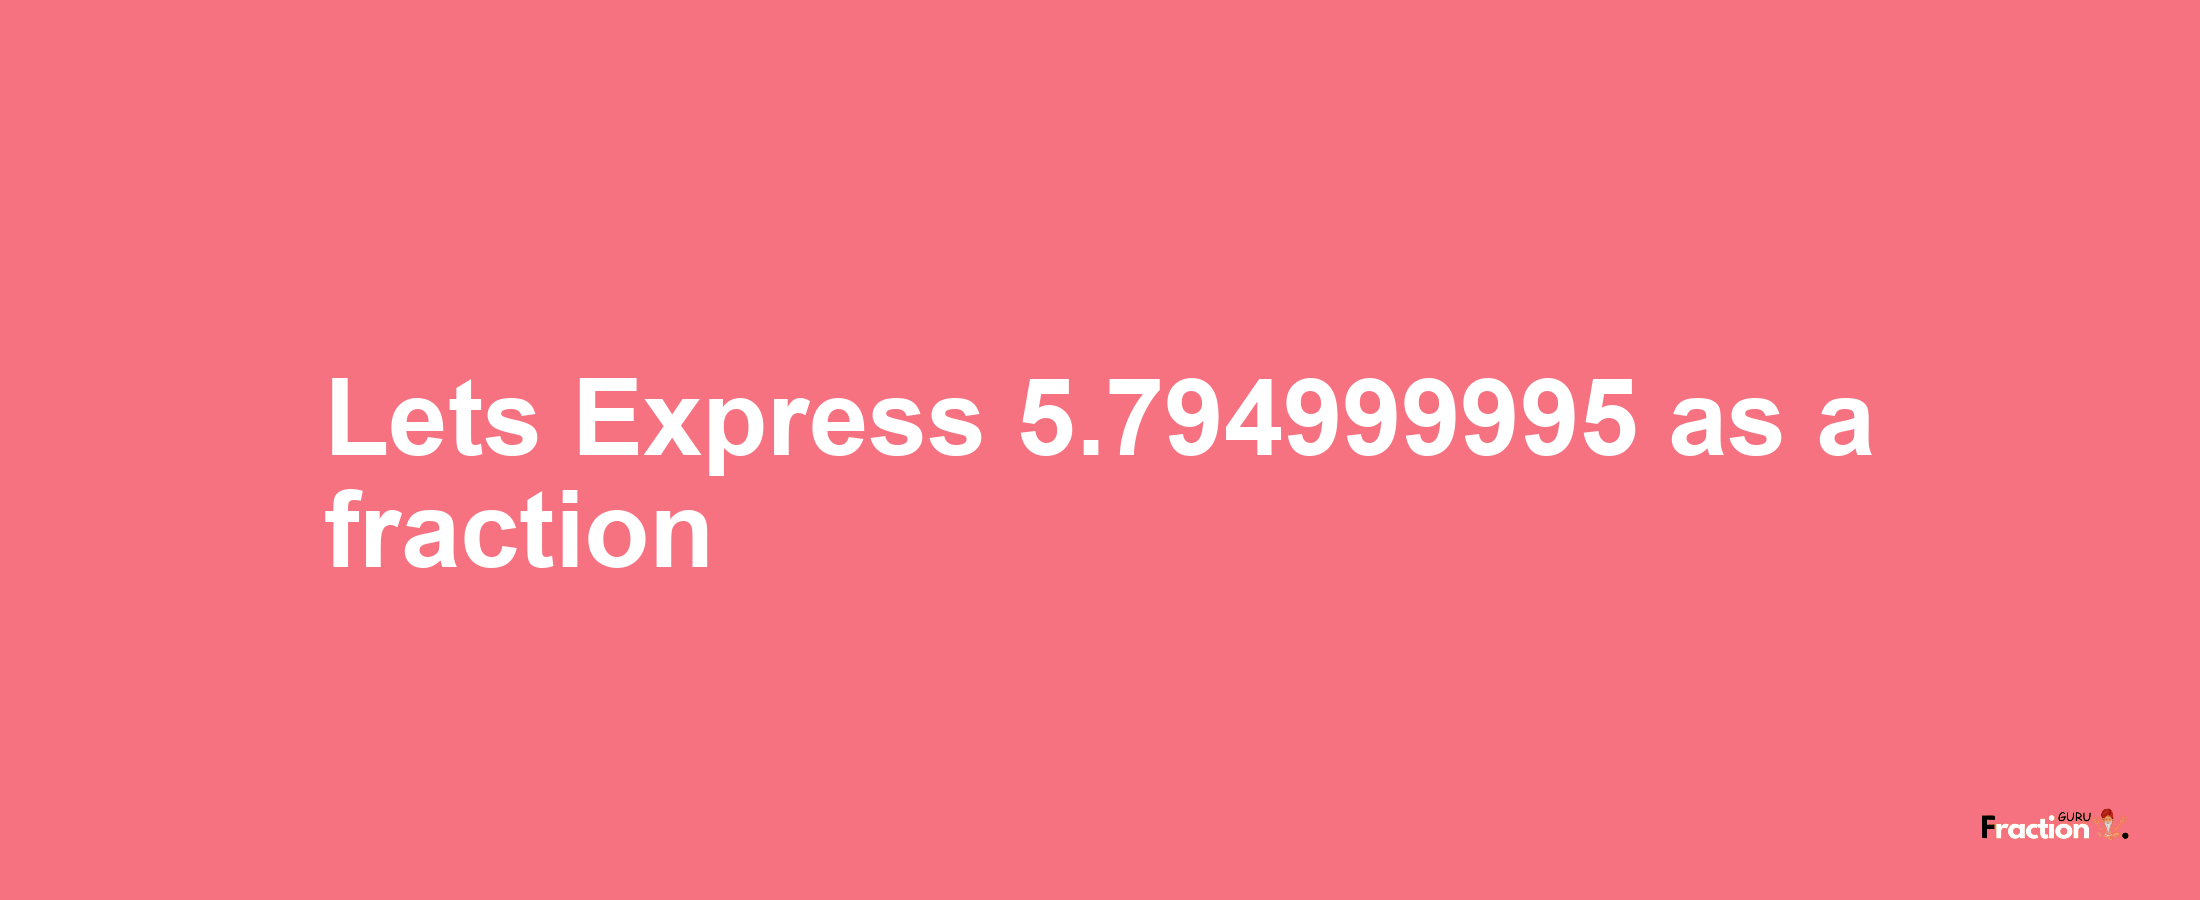 Lets Express 5.794999995 as afraction